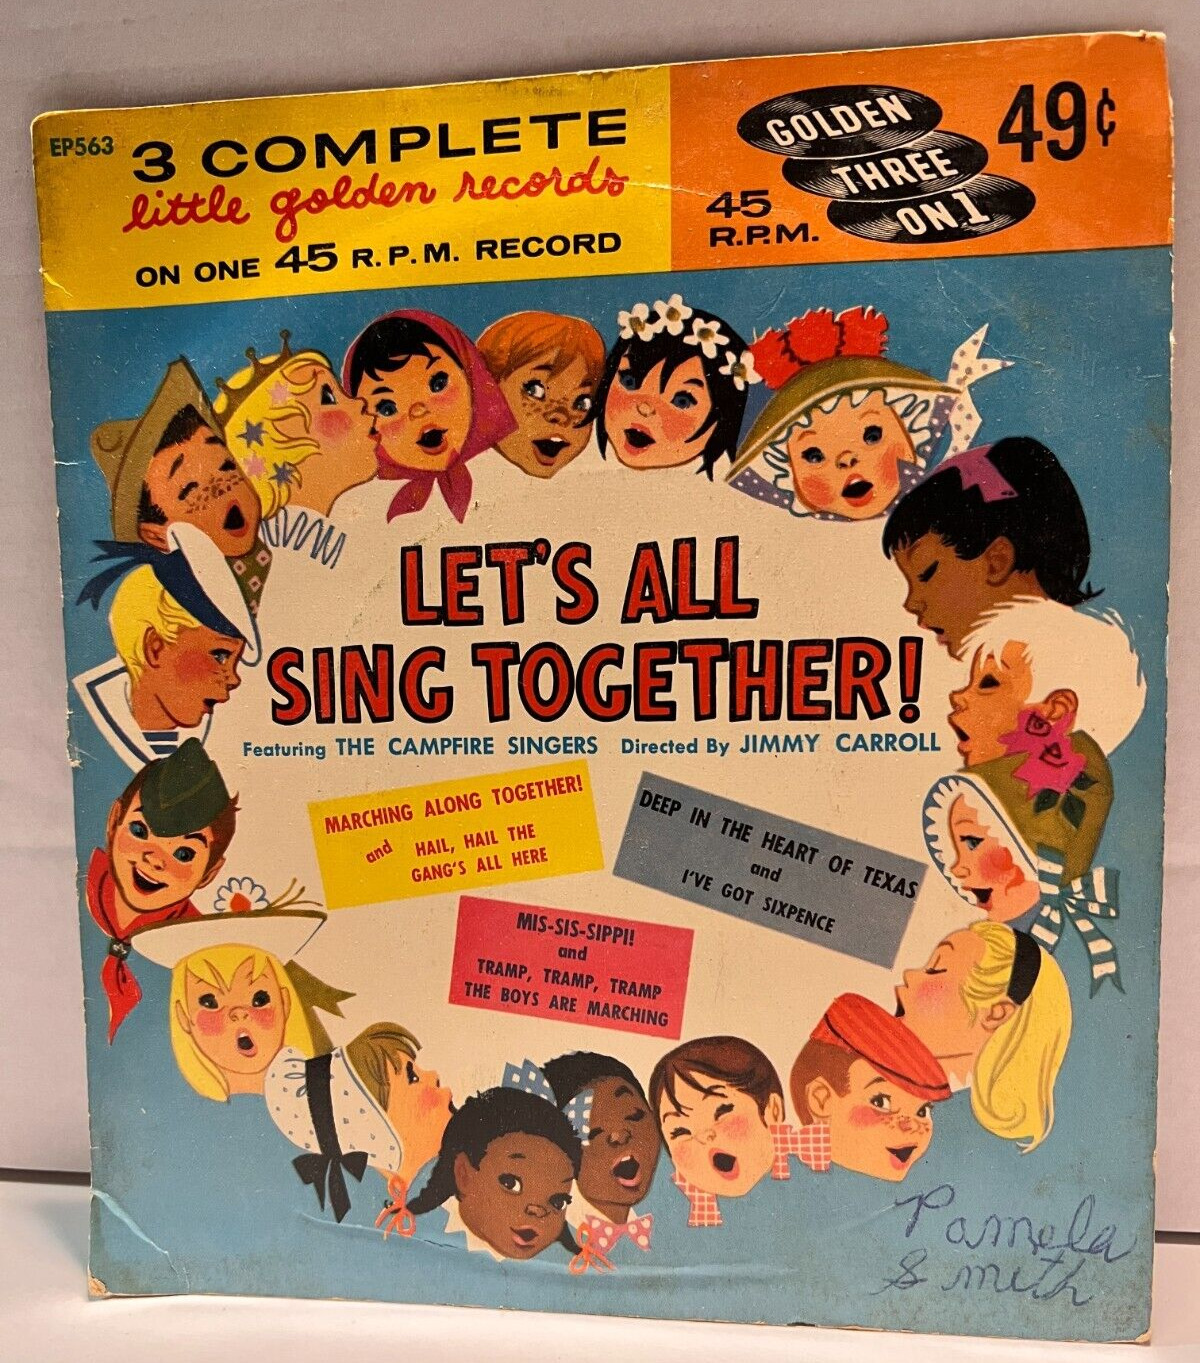 A70 The Campfire Singers: Lets All Sing Together! Golden Records EP563 -Children